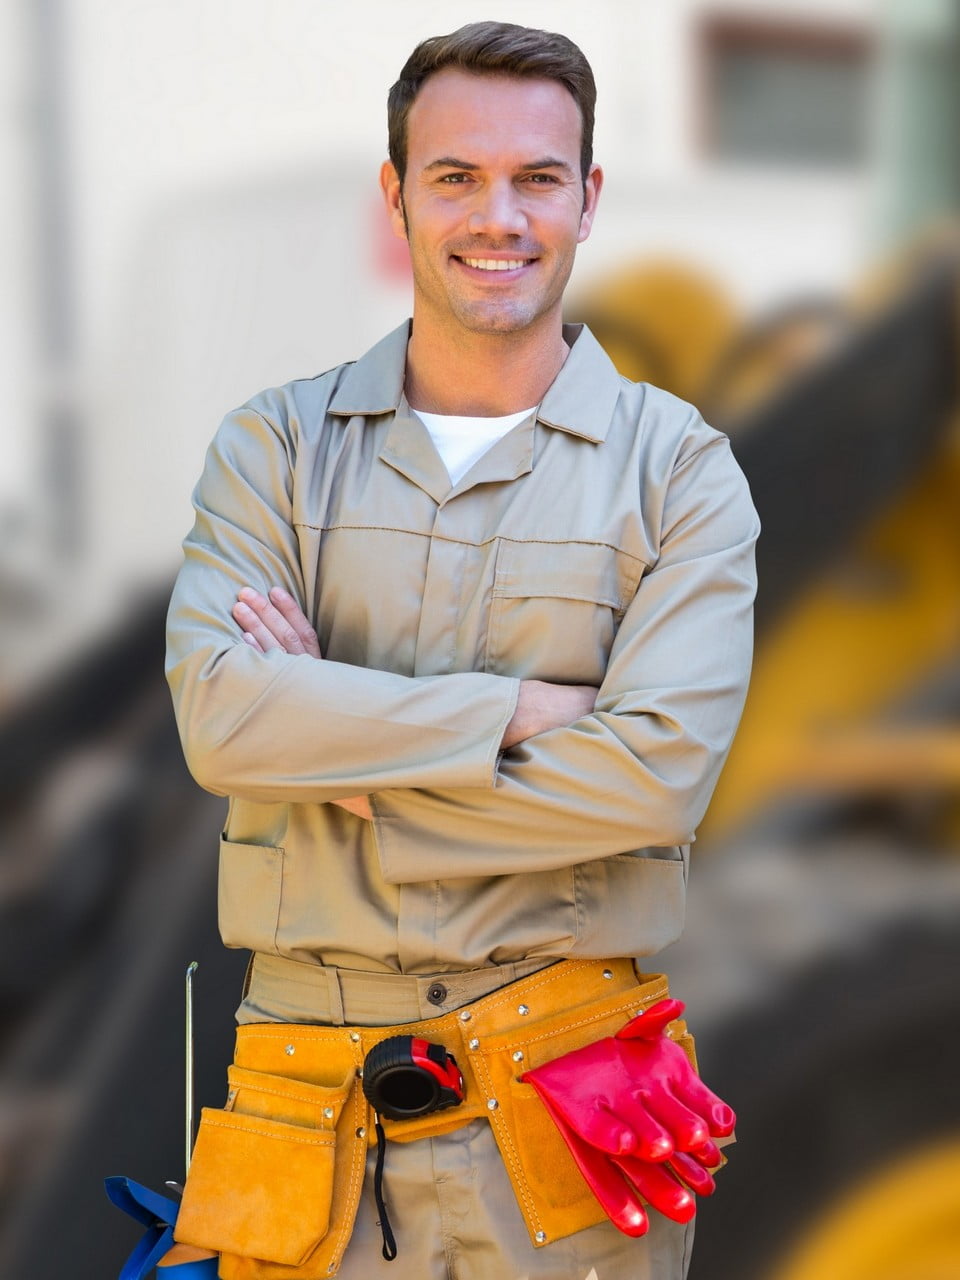 Digital composition of worker standing with arms crossed against construction site in background